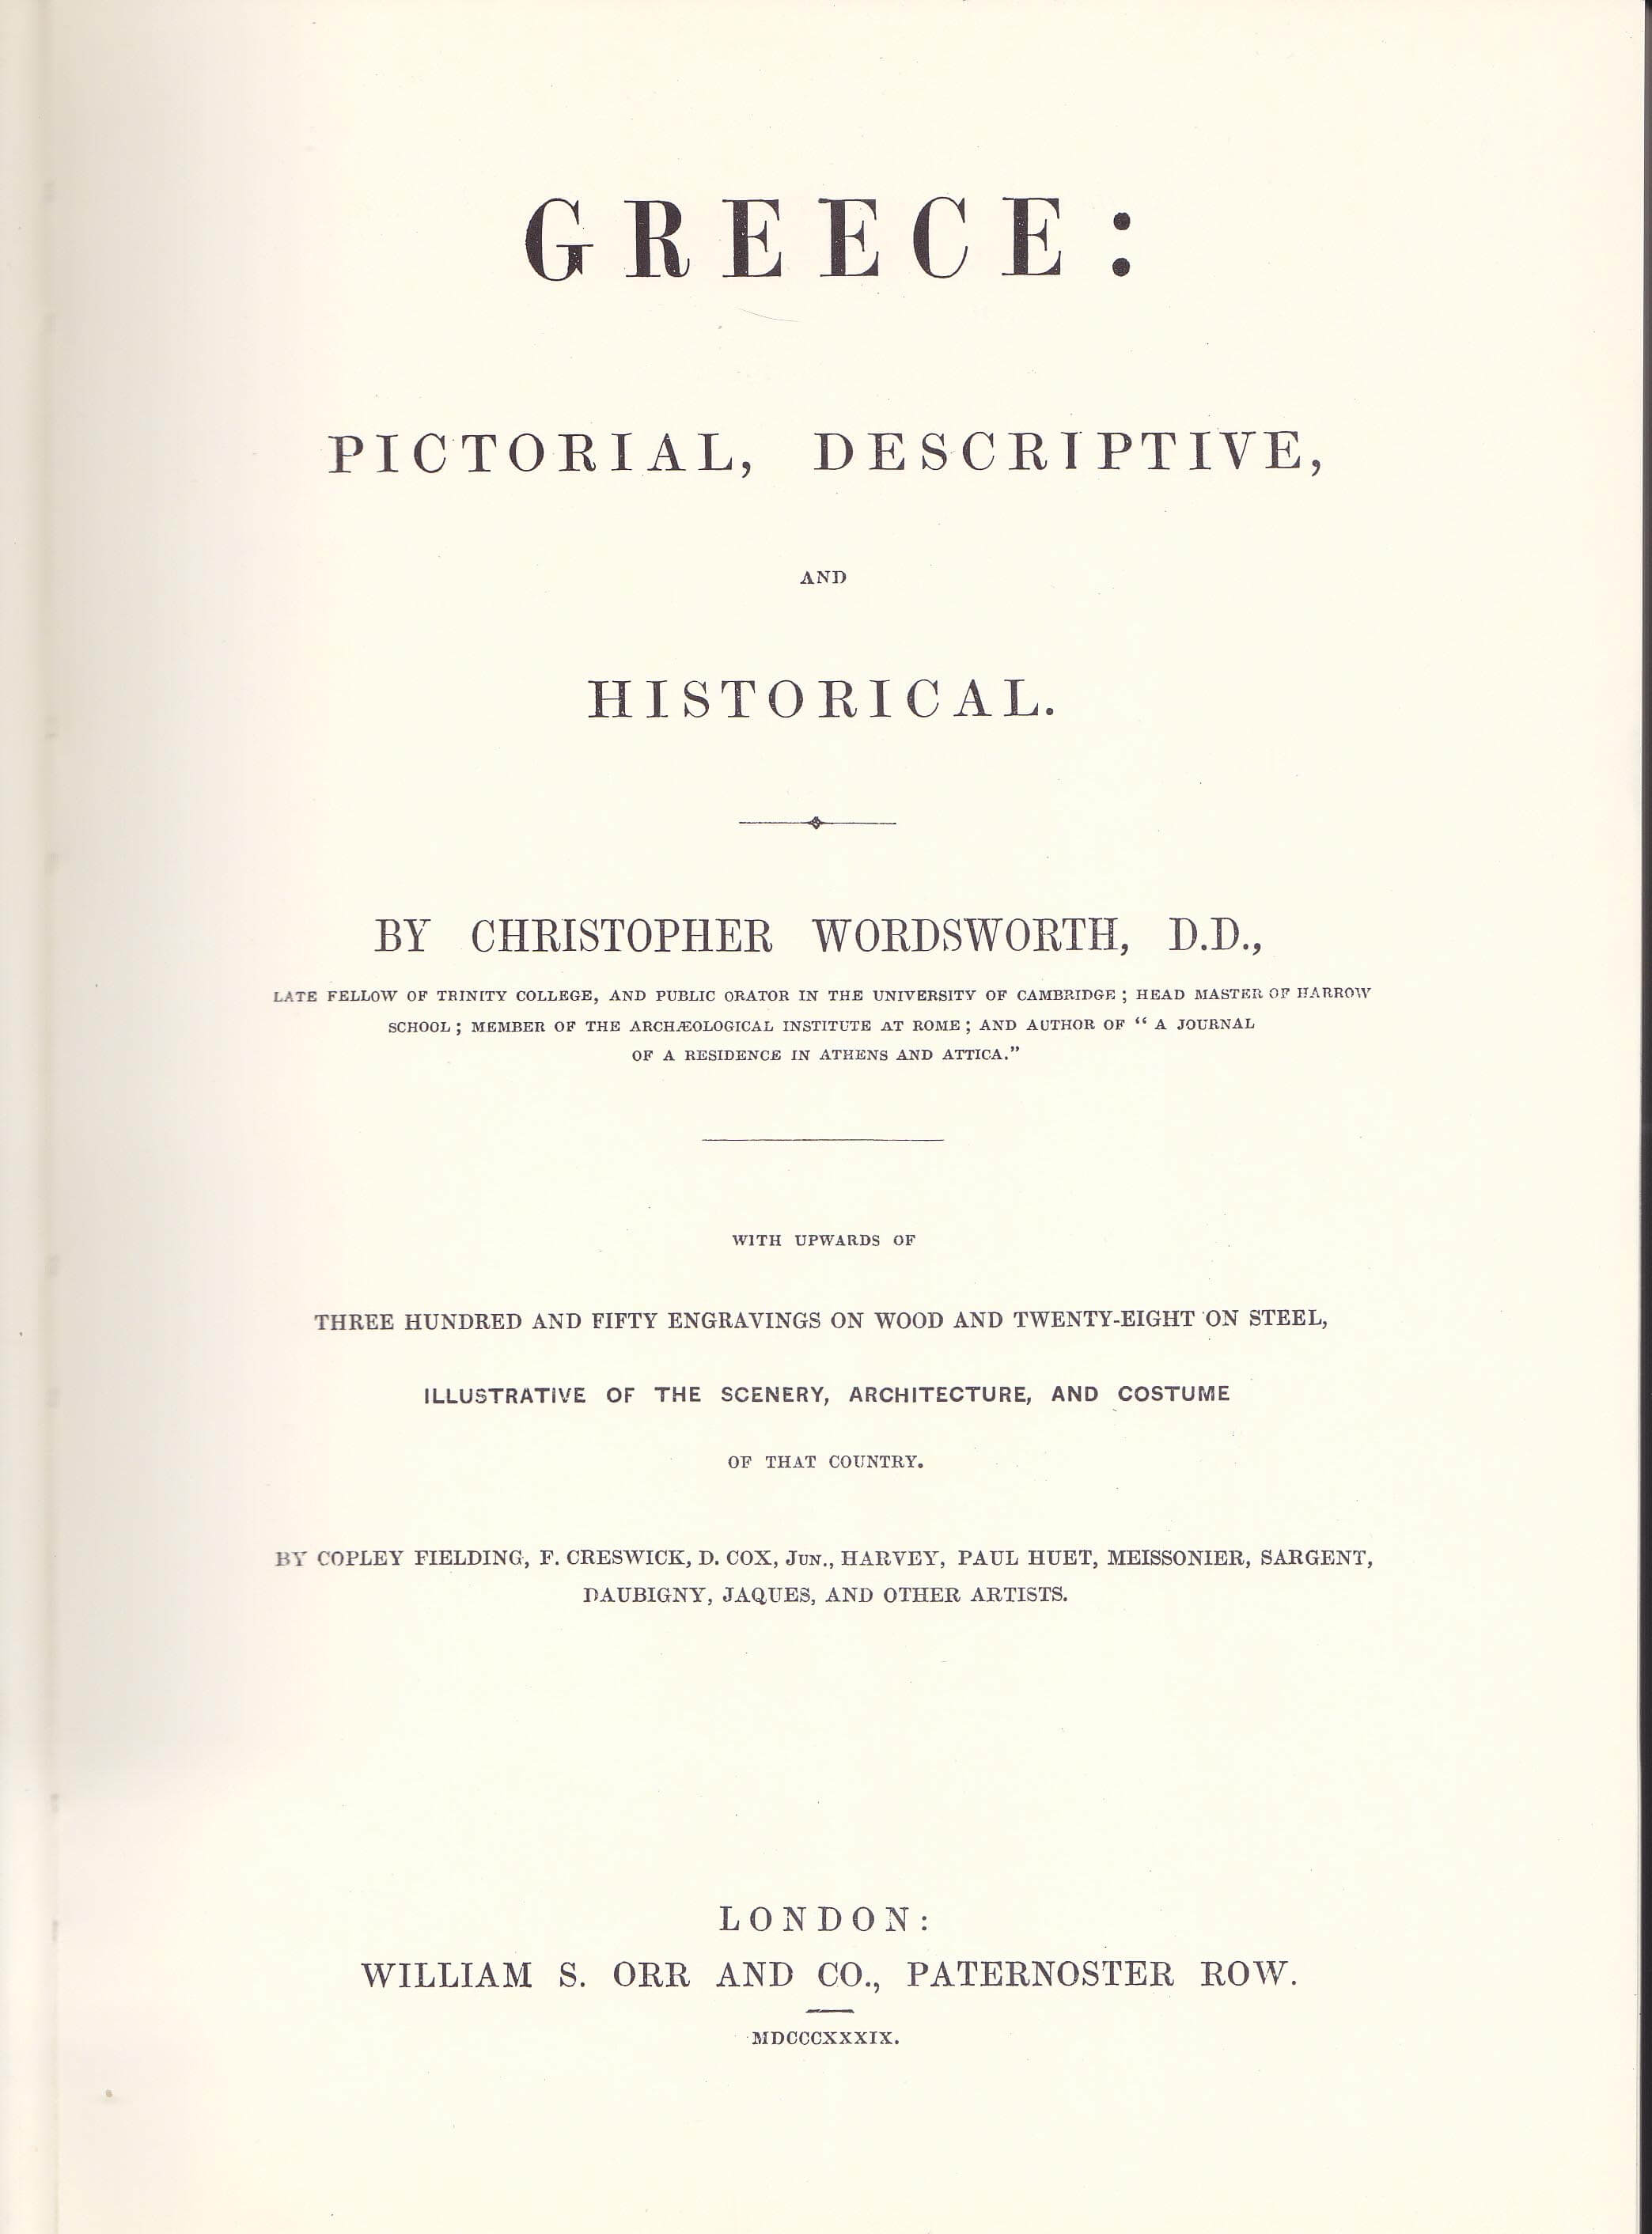 Christopher Wordsworth – “Greece, Pictorial, Descriptive and Historical”